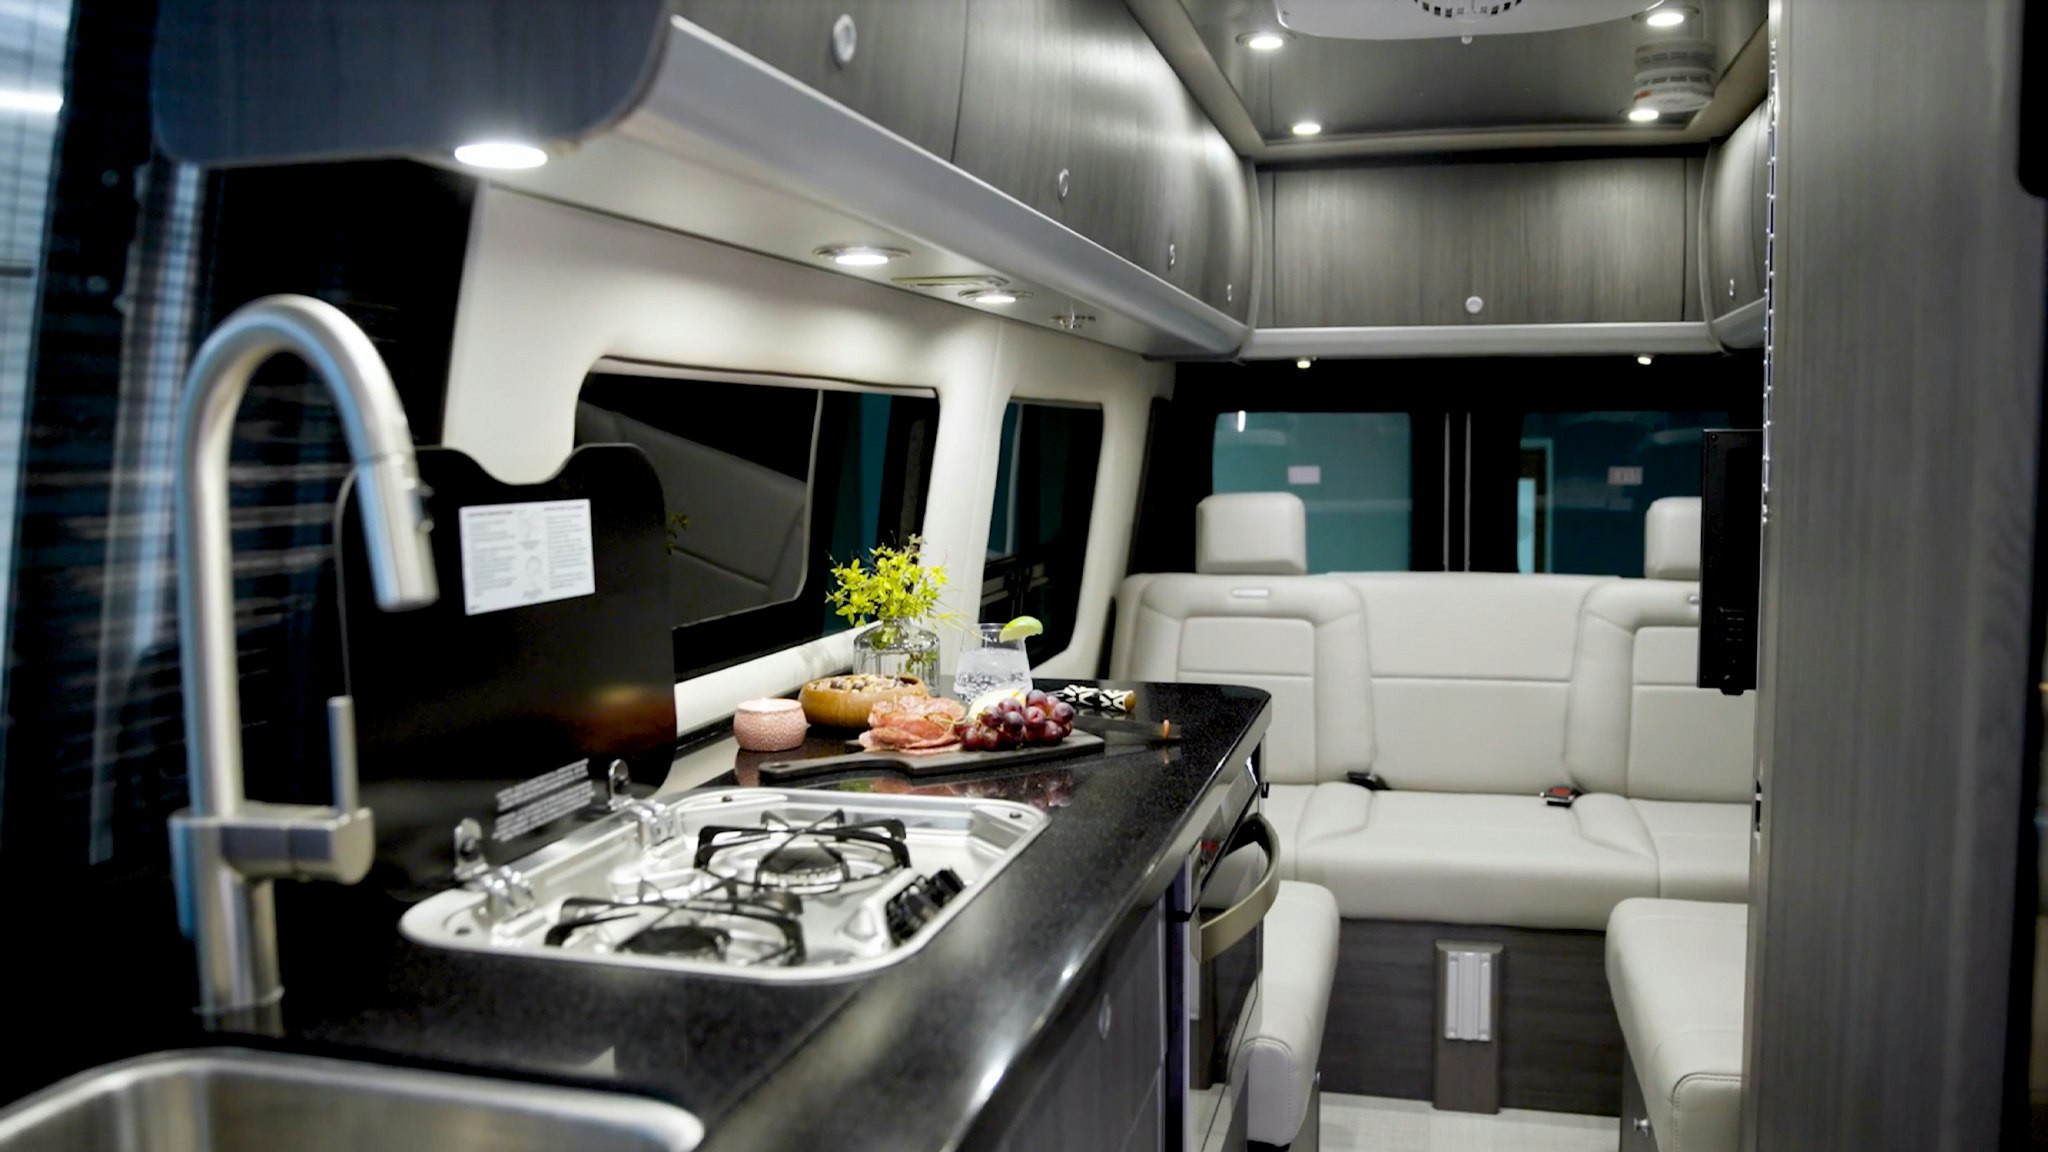 Inside an Airstream Touring Coach Class B Motorhome with lux white interior and a platter of grapes sitting on the kitchen counter.